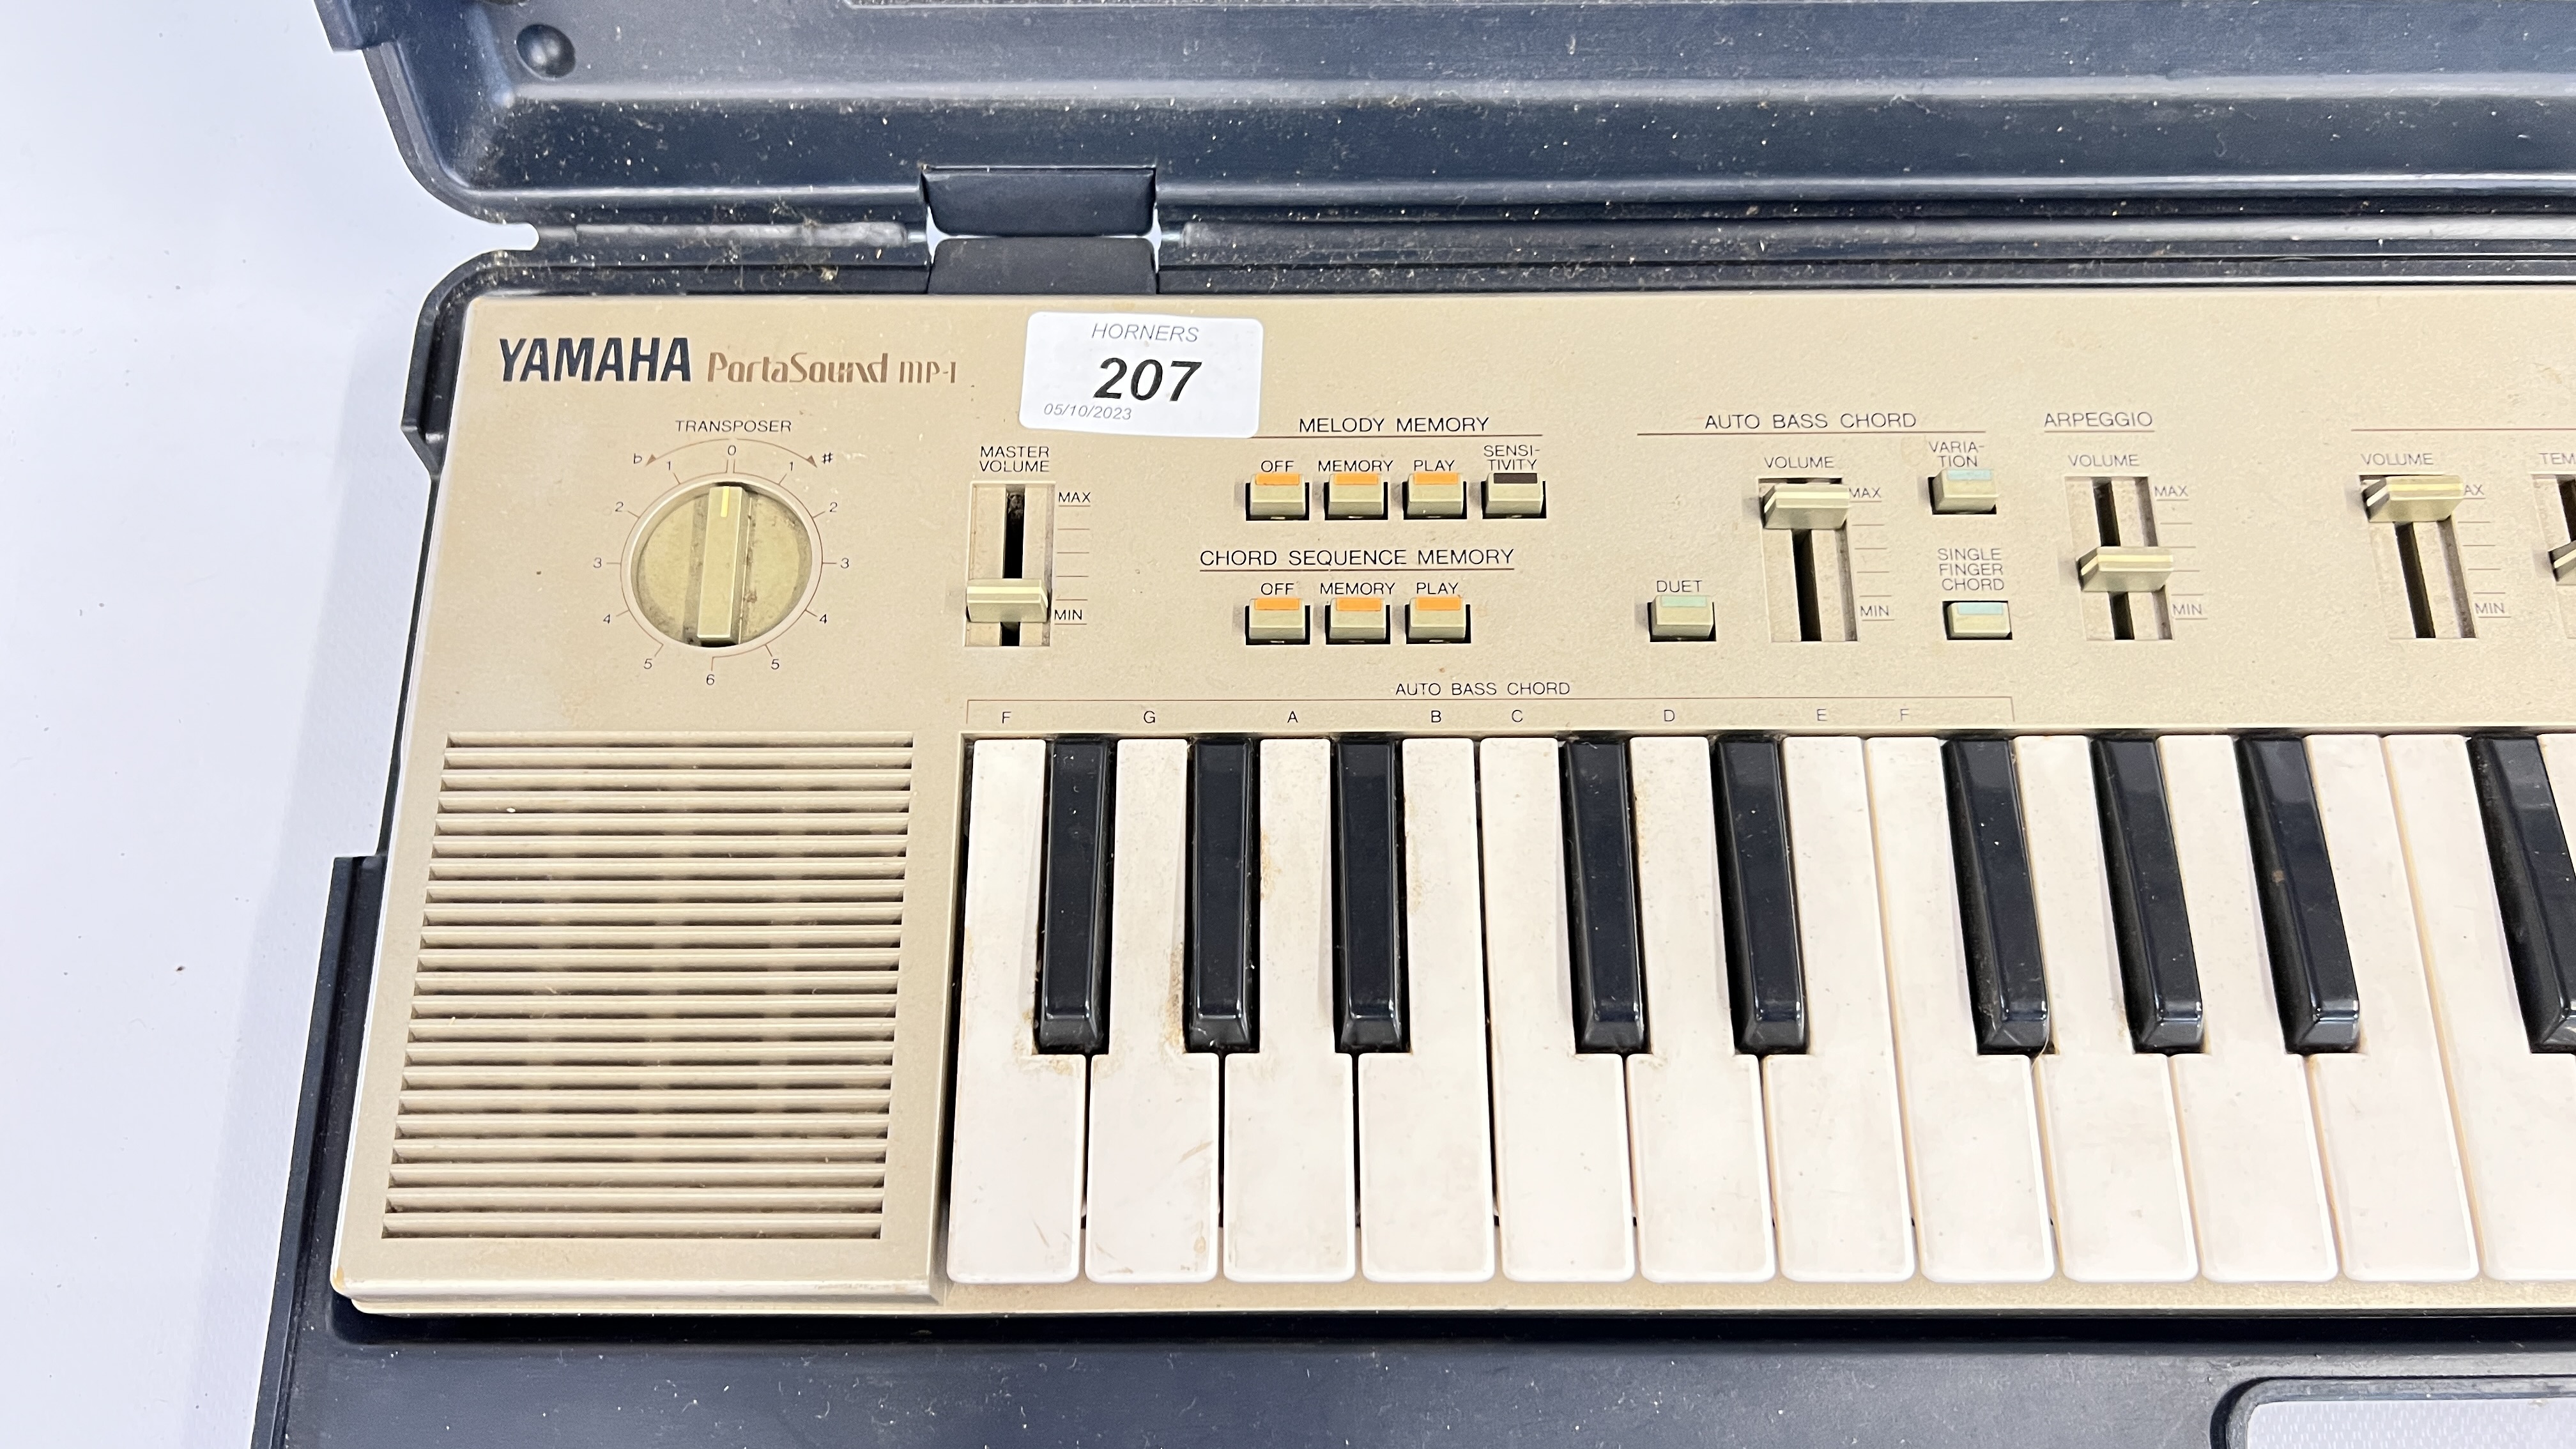 YAMAHA PORTASOUND MP-1 IN CARRY CASE, NO POWER ADAPTOR - SOLD AS SEEN - AS CLEARED. - Image 2 of 6